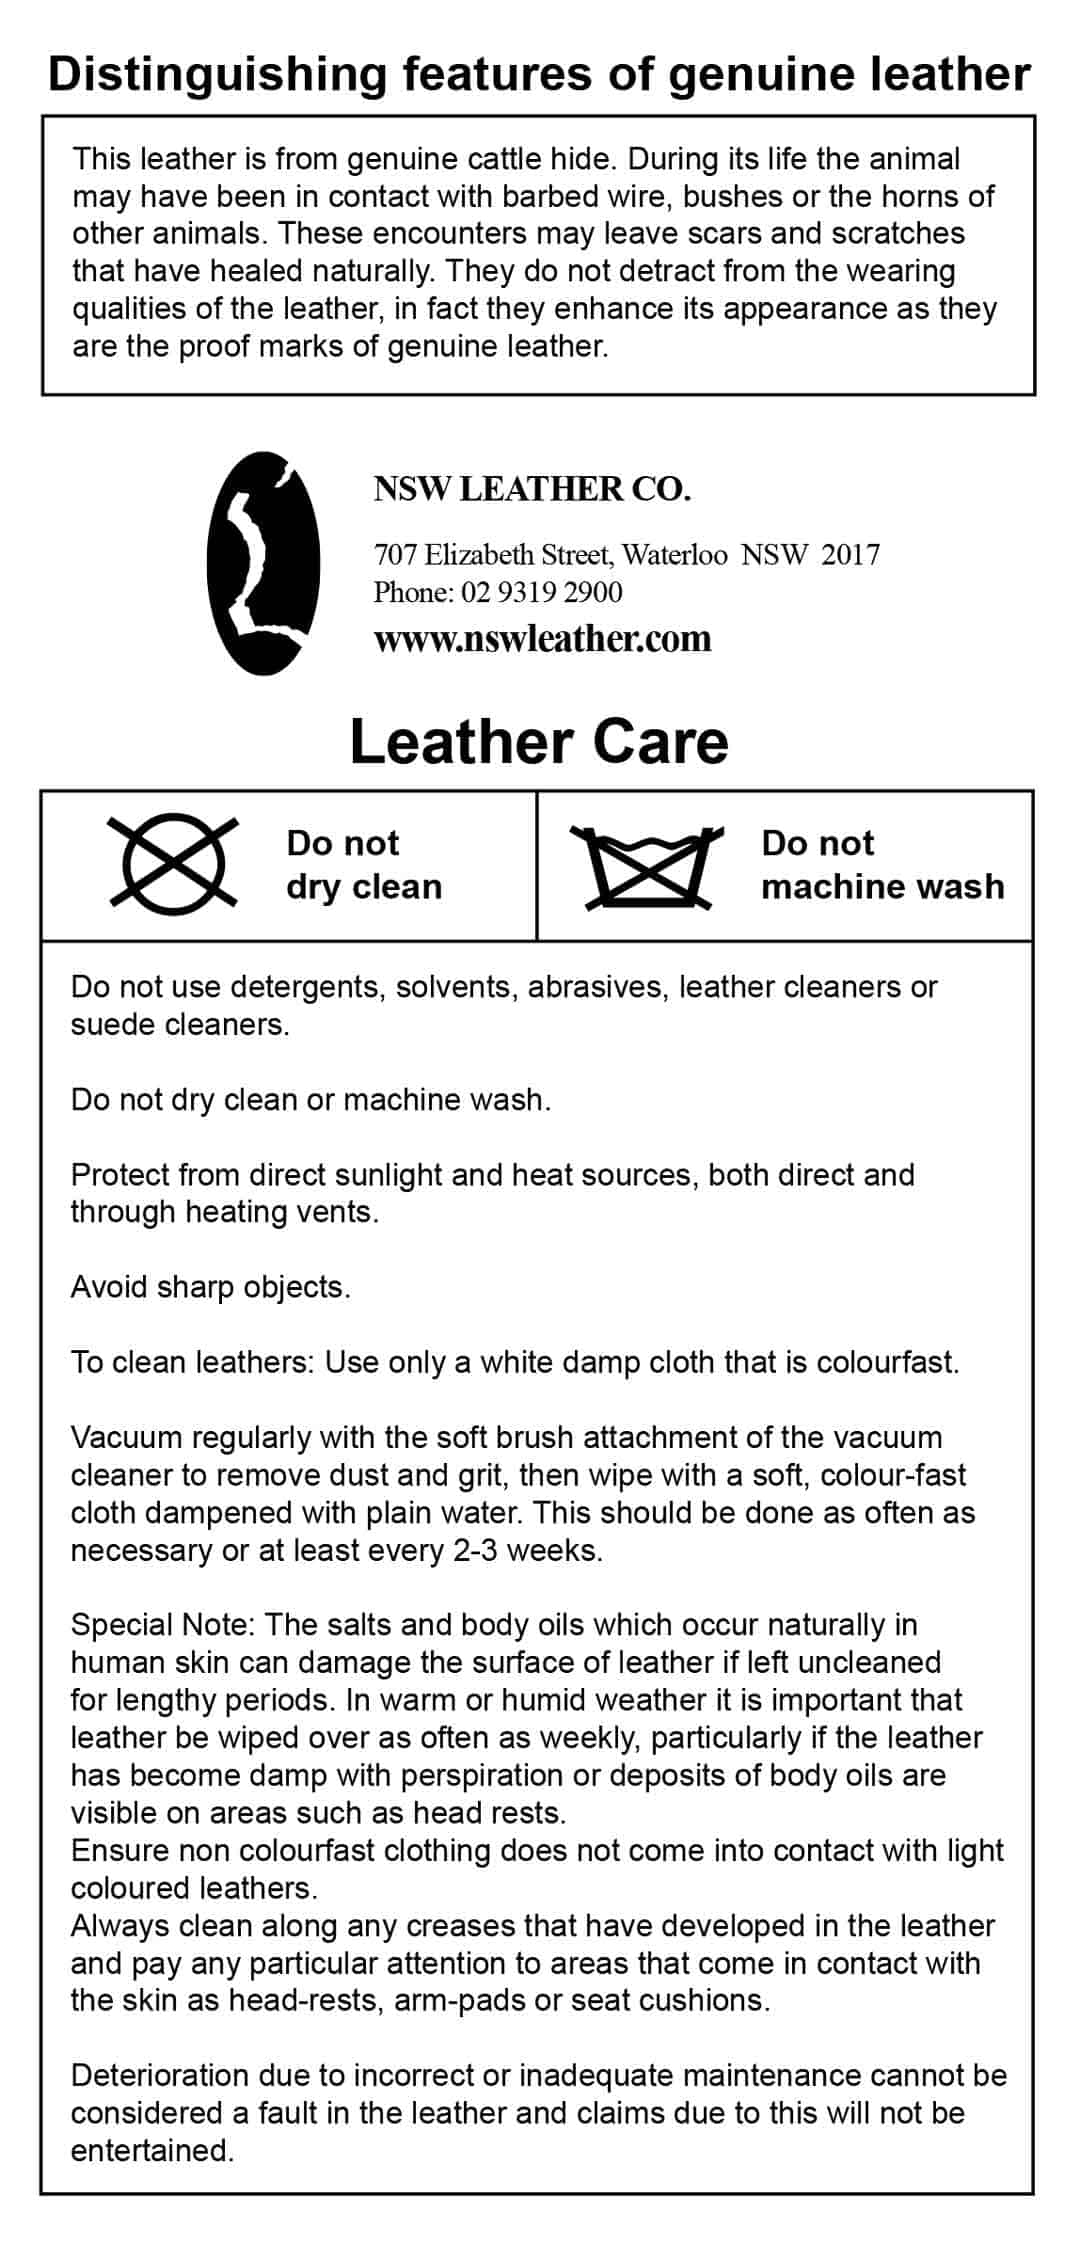 NSW Leather, Sydney, Leather Lounge care and cleaning document